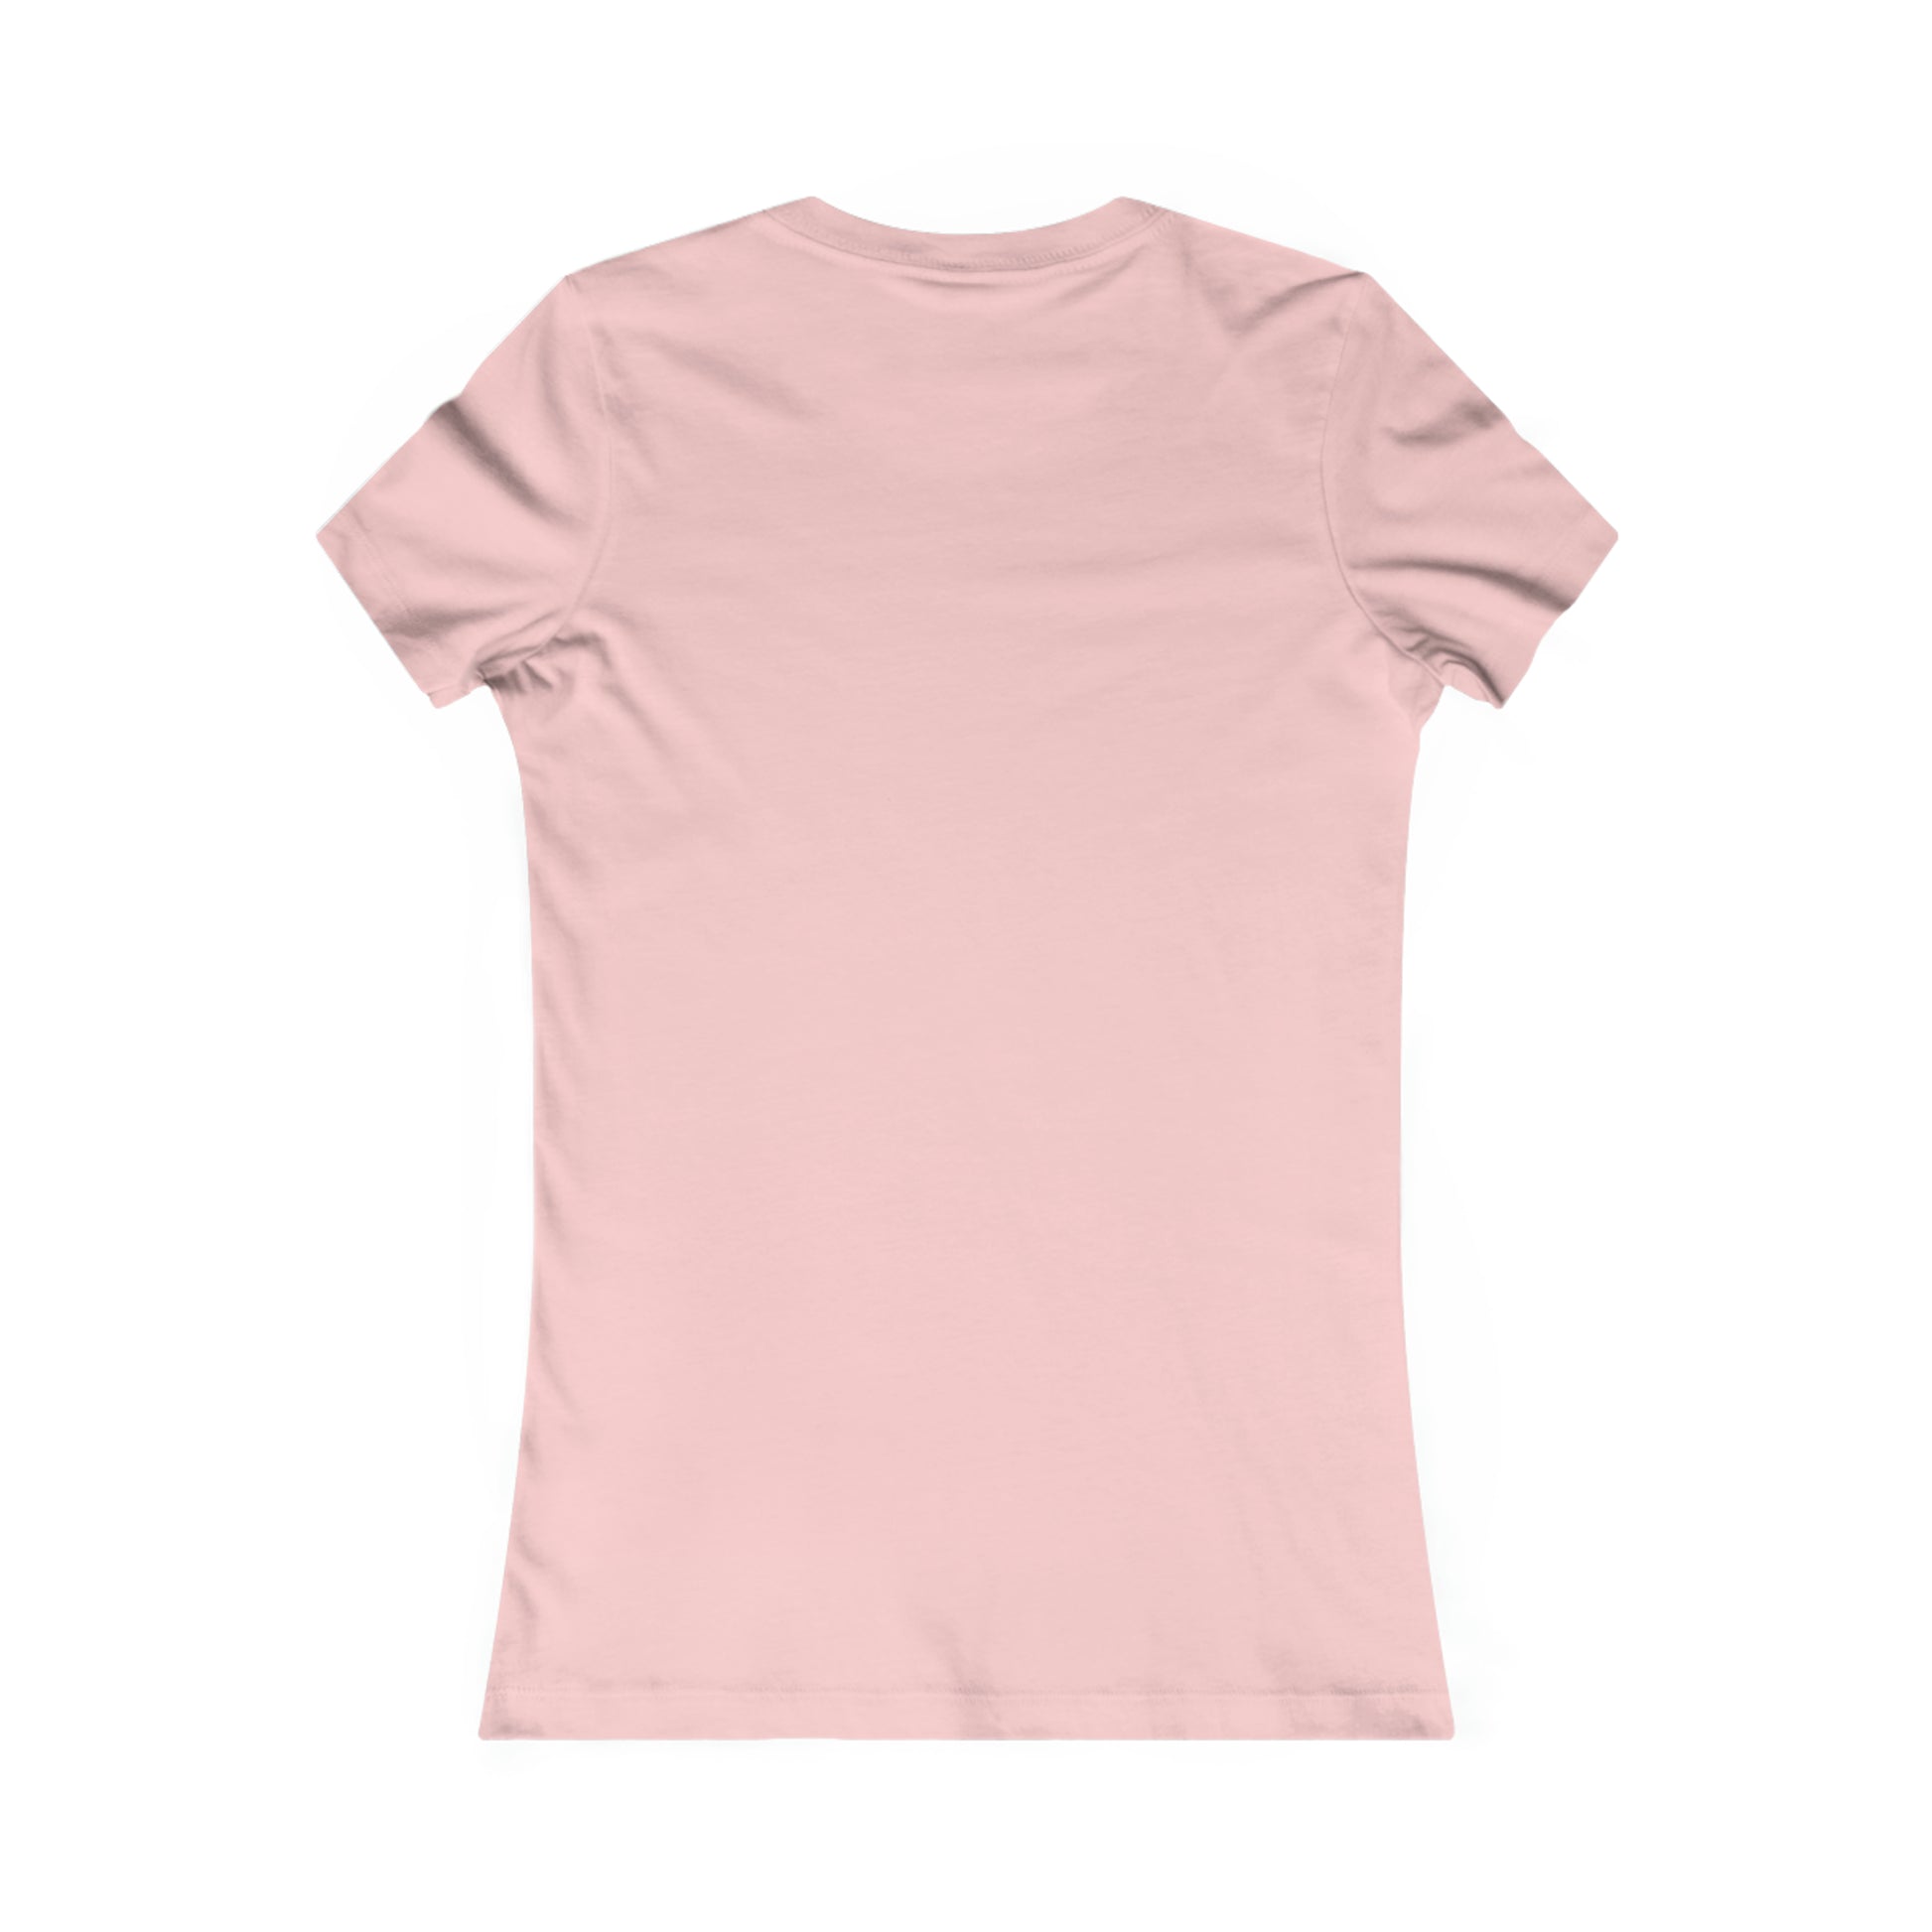 Flat back view of the Pink shirt